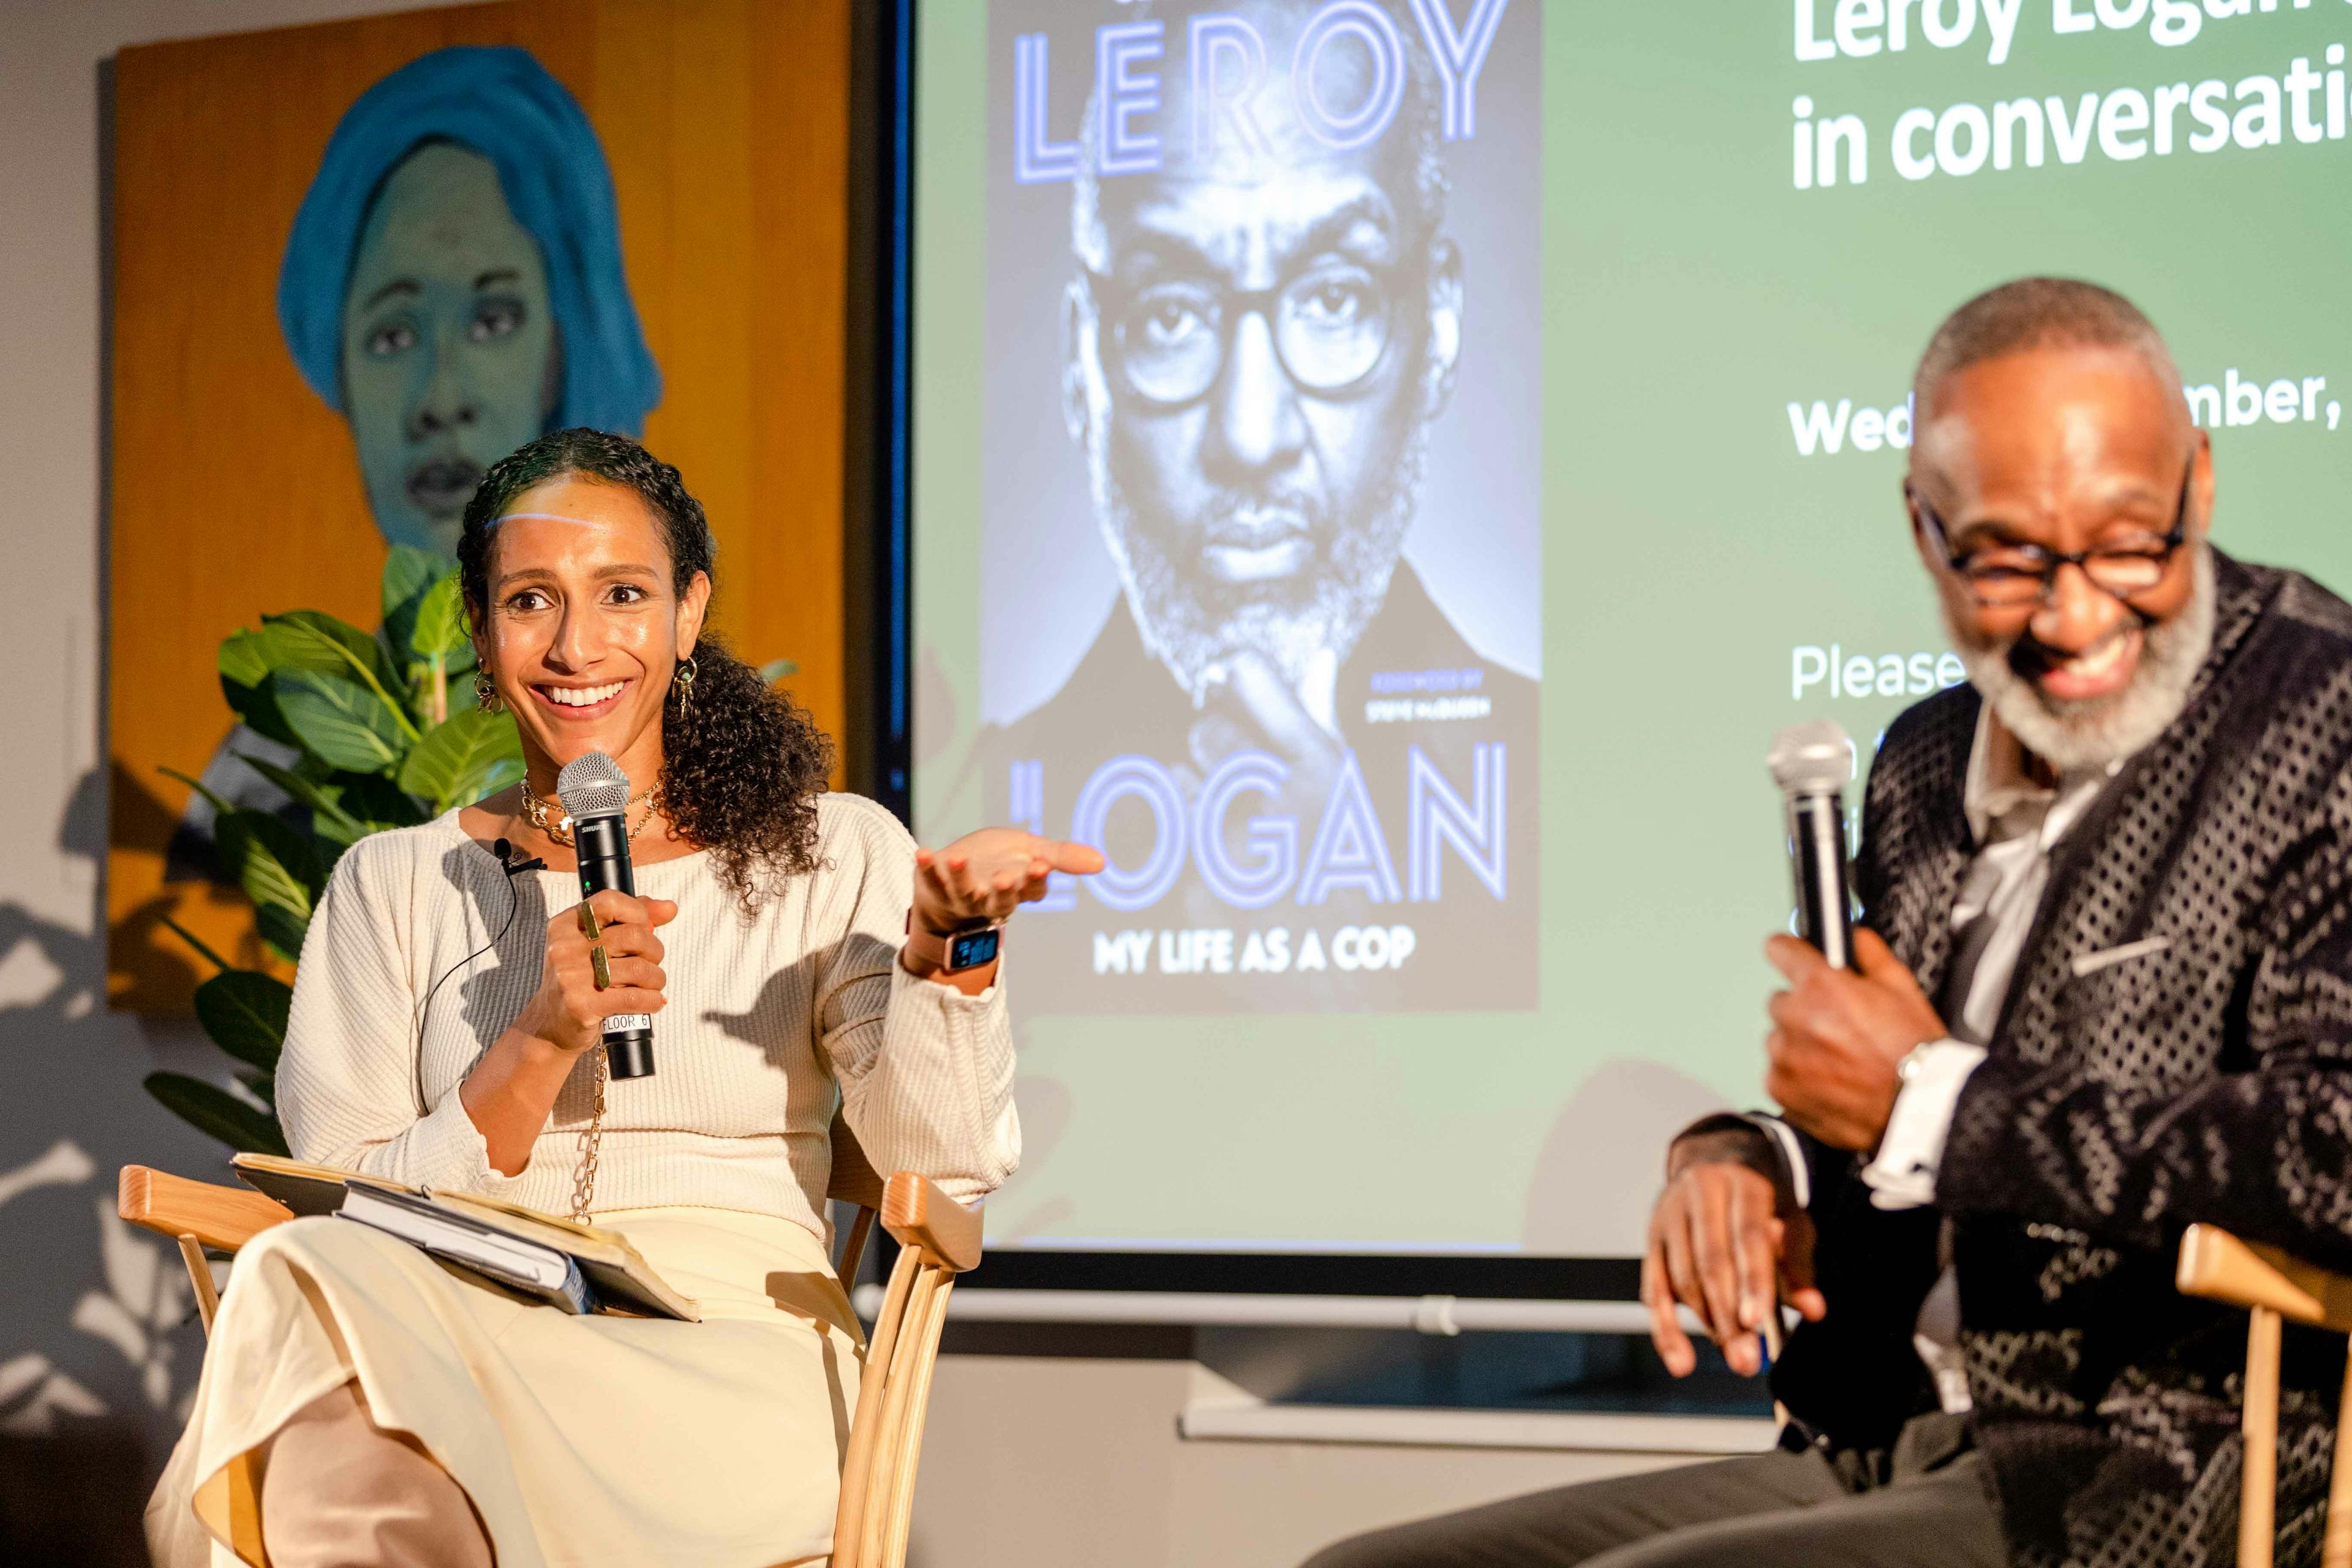 My Life As A Cop_ Leroy Logan in Conversation with Afua Hirsch.jpg